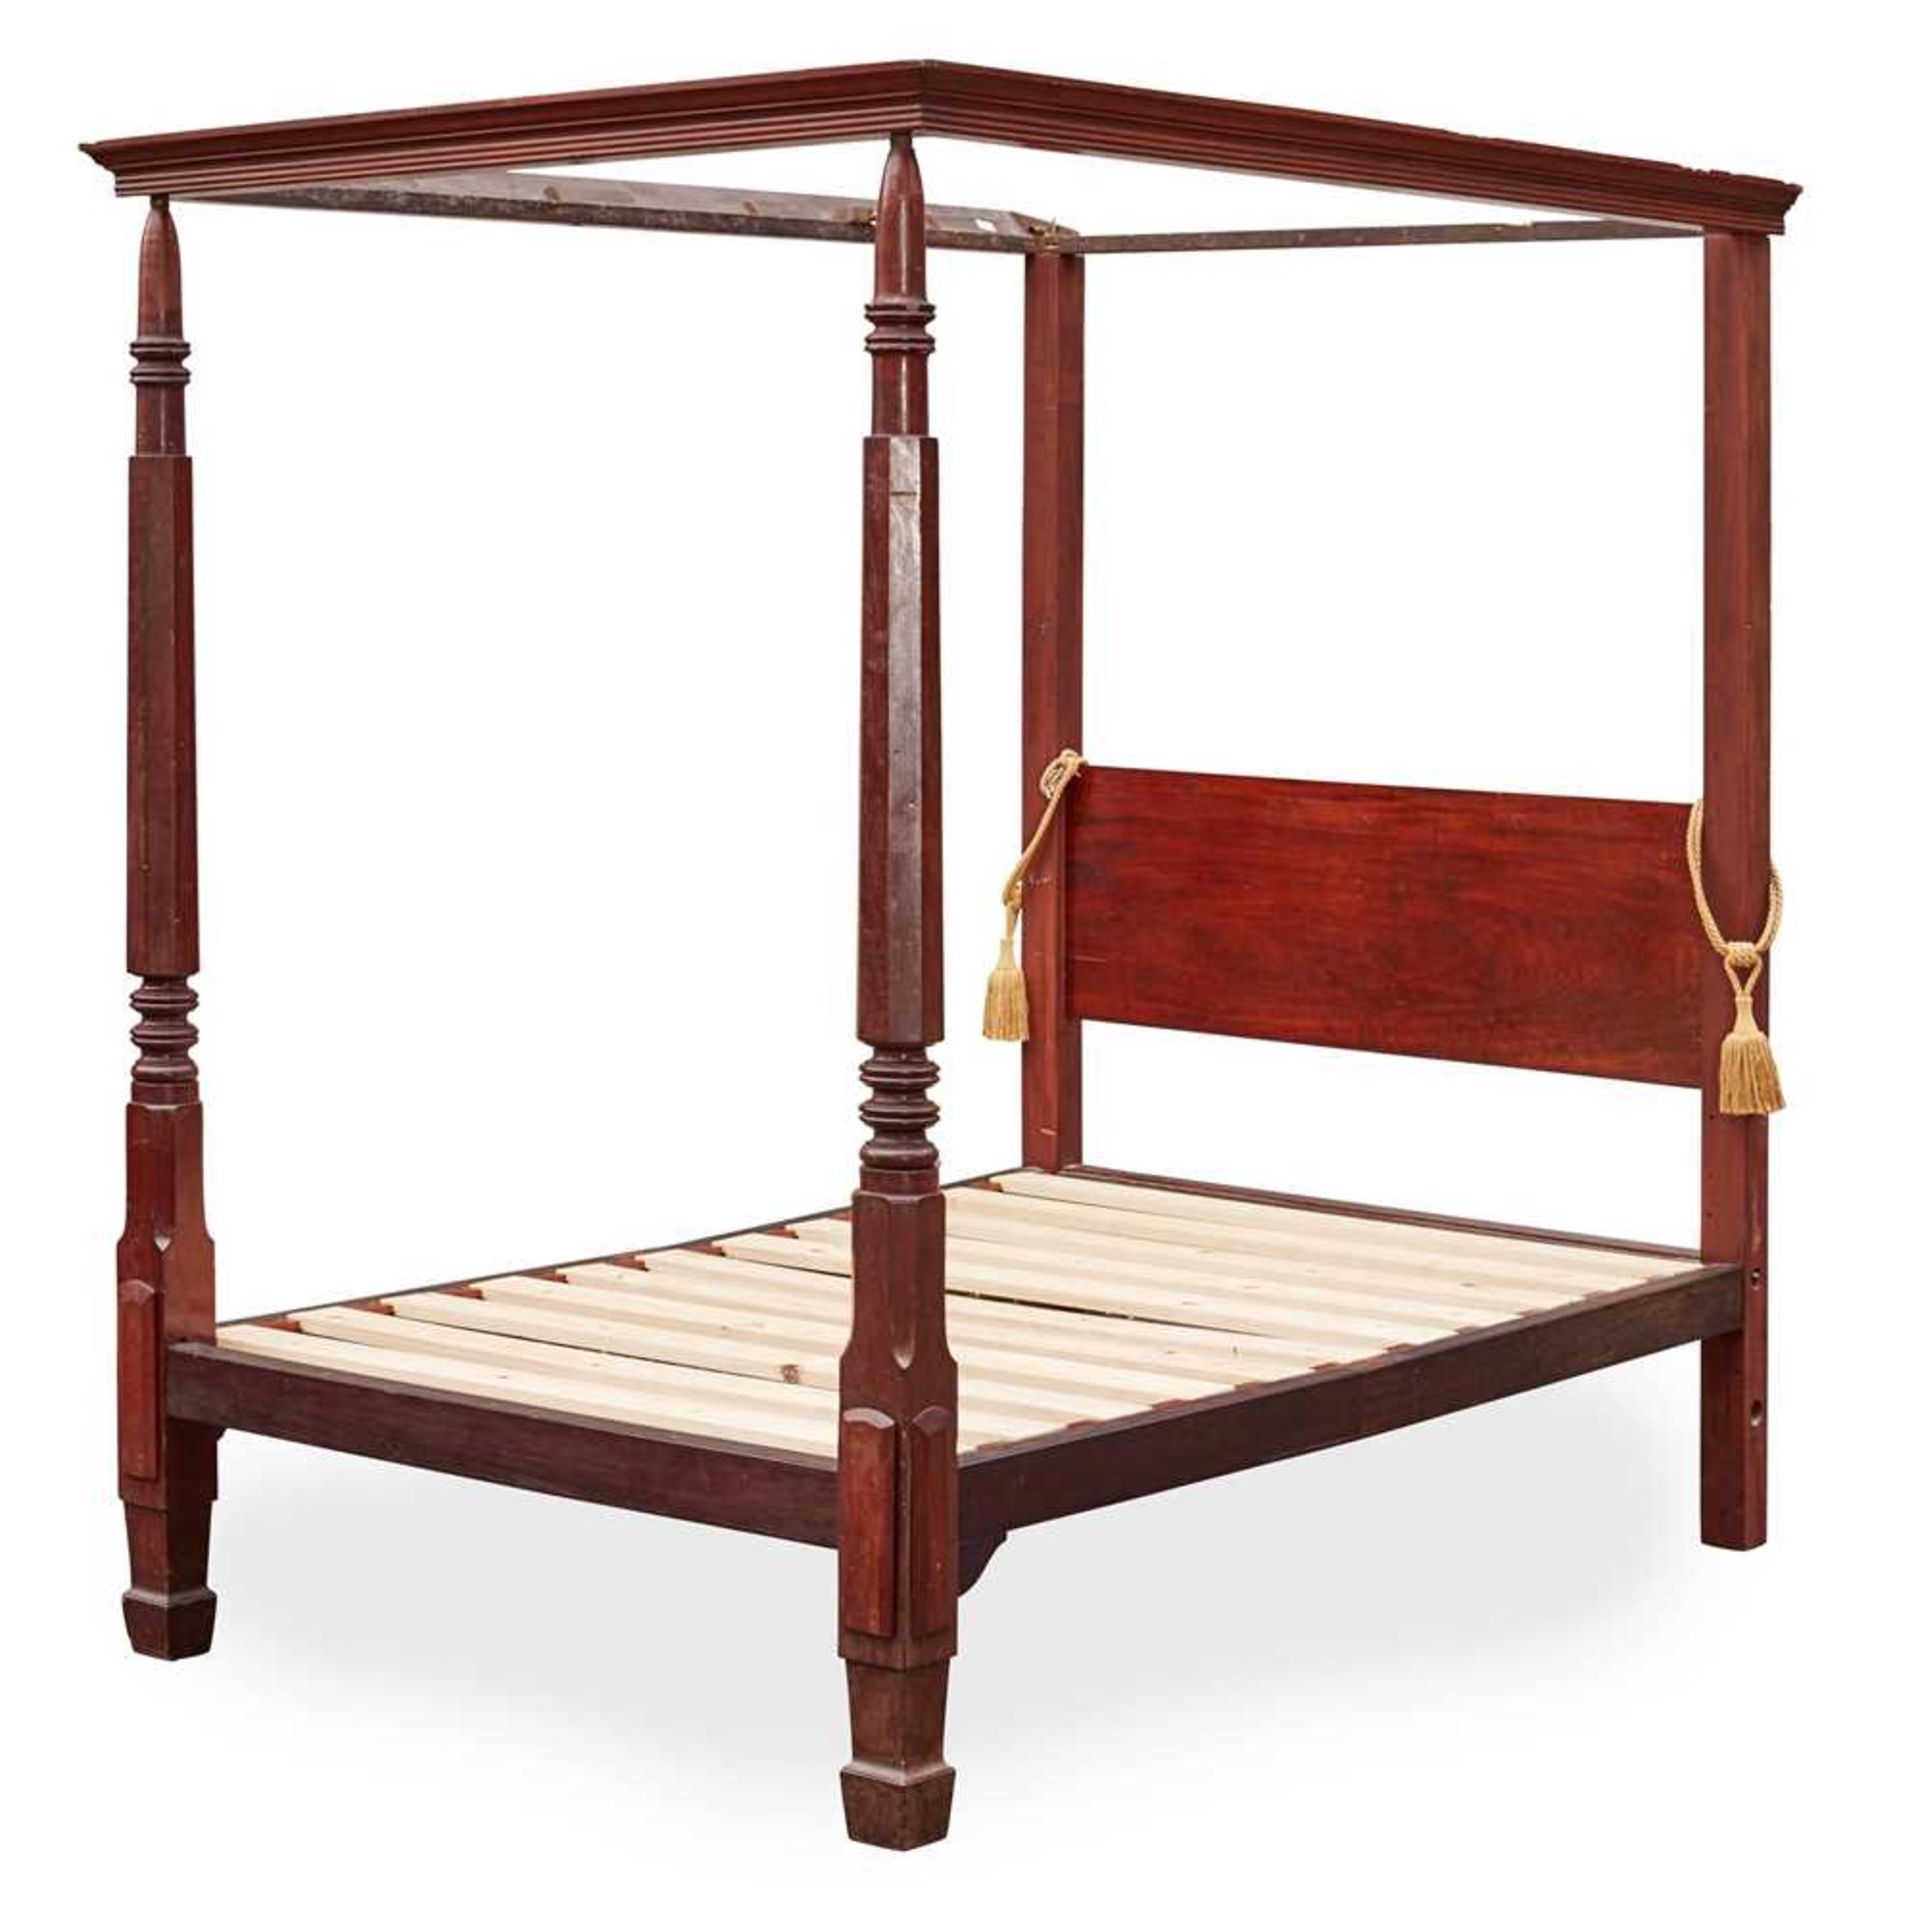 GEORGE III MAHOGANY FOUR POSTER BED LATE 18TH CENTURY